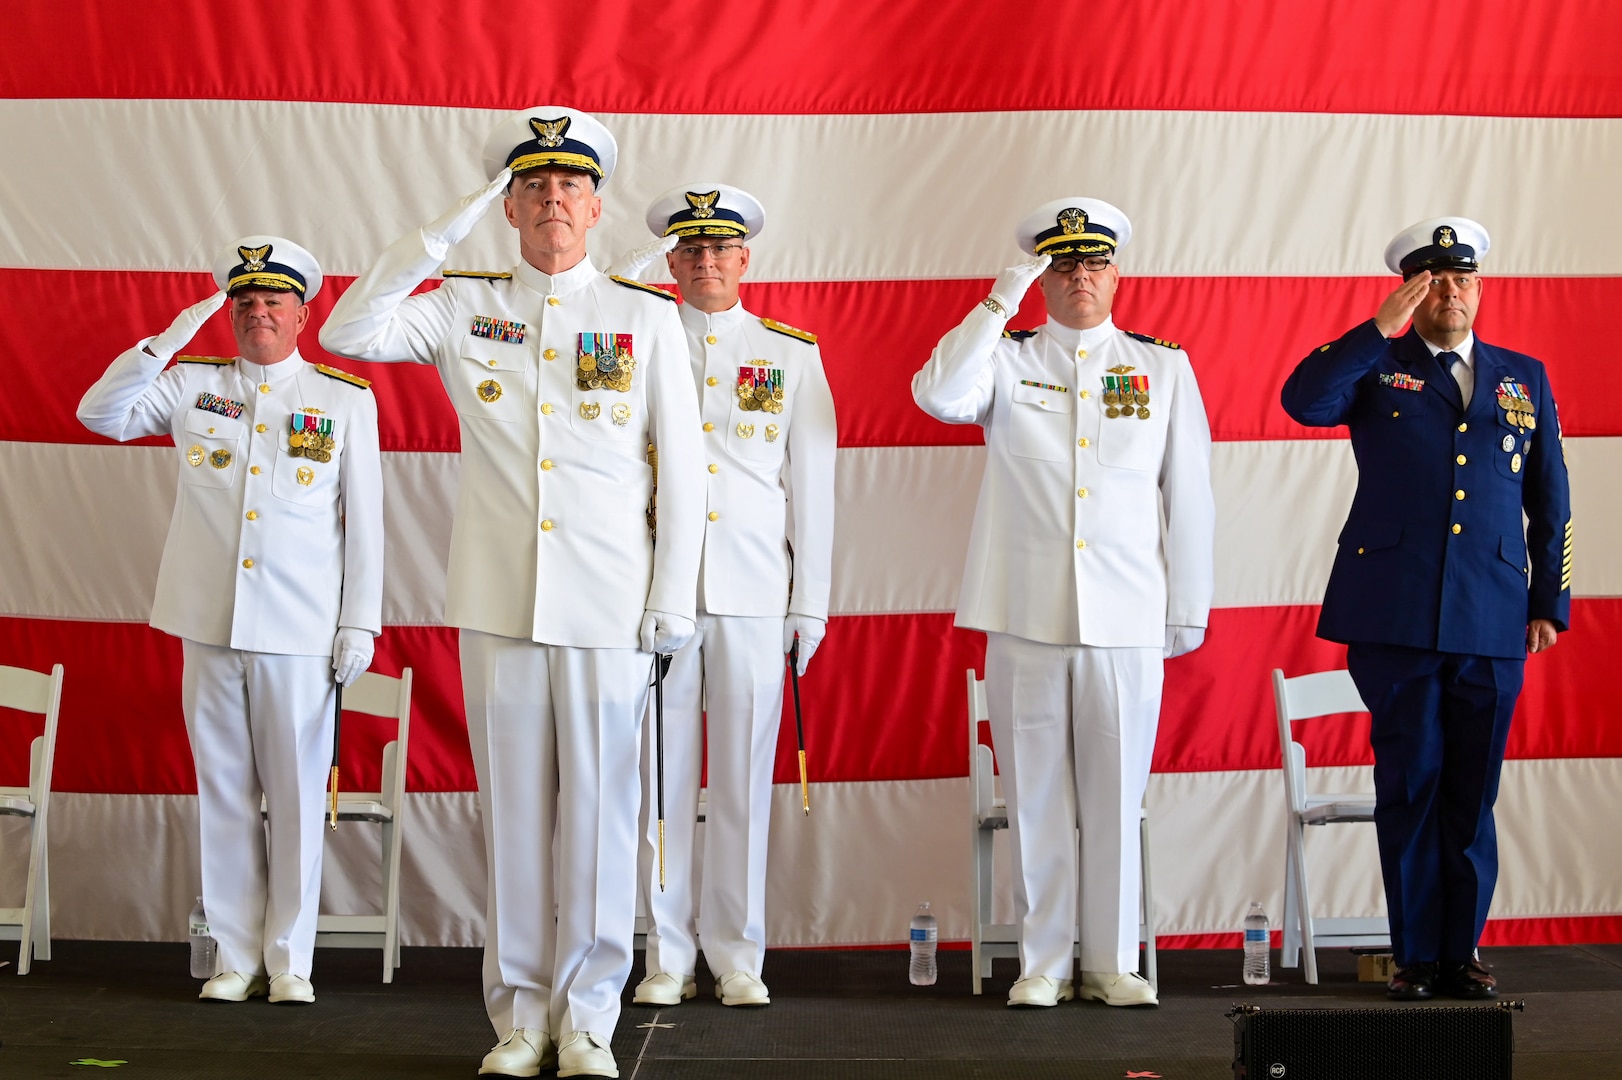 Vice Adm. Kevin Lunday, Coast Guard Atlantic Area Commander, oversees Rear Adm. Brendan McPherson, the former Seventh District Commander, and Rear Adm. Douglas Schofield, the Seventh District Commander, render a salute during a change of command ceremony at Air Station Miami in Opa-locka, Florida, June 9, 2023. During the ceremony Schofield relieved McPherson as the Seventh District Commander and Director of Department of Homeland Security Joint Task Force - Southeast. (U.S. Coast Guard photo by Petty Officer 3rd Class Eric Rodriguez)